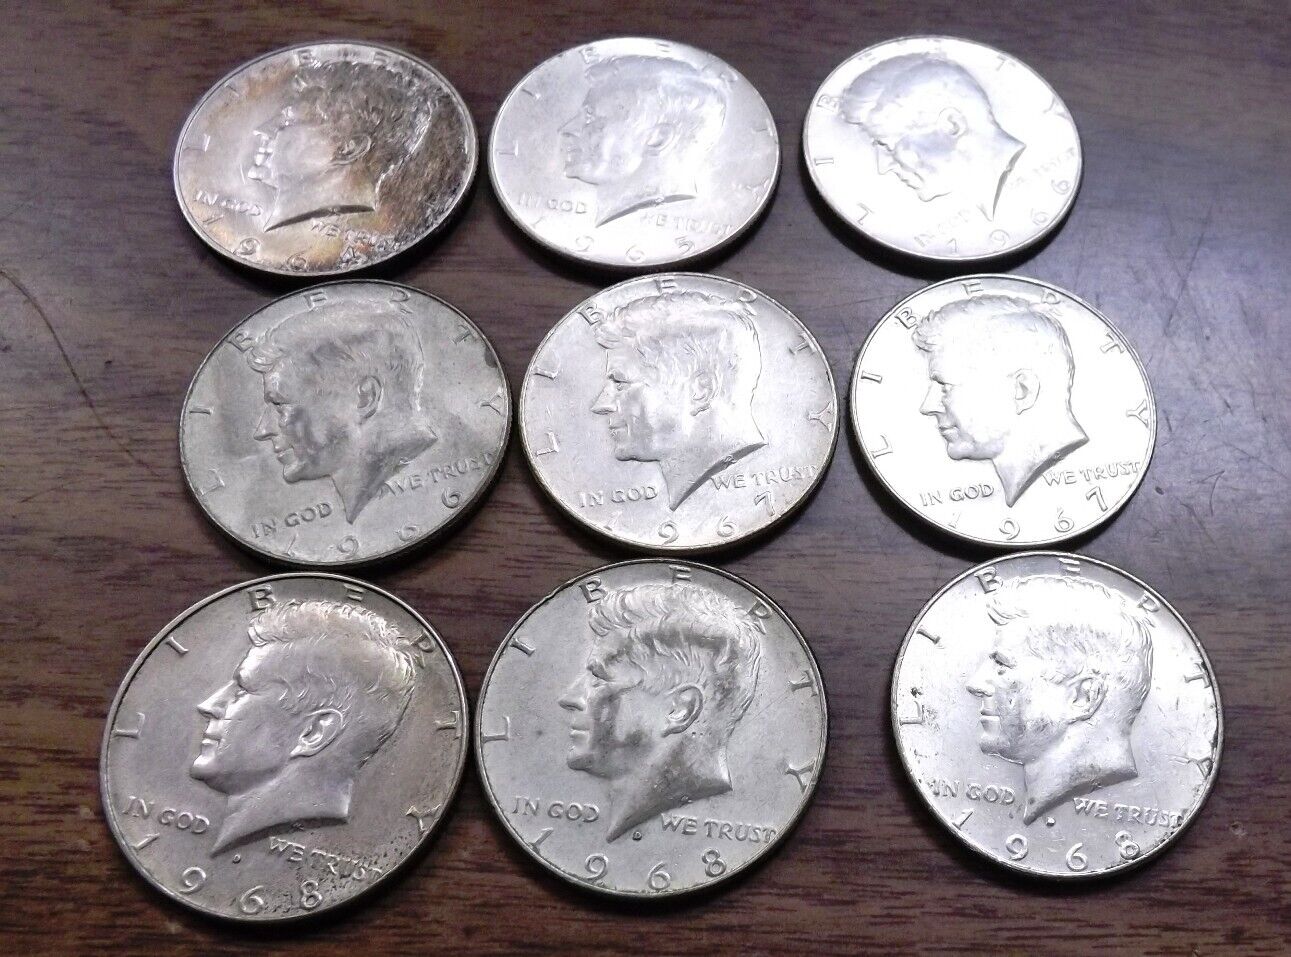 Collection of 9 Kennedy Silver Halves 1 1964 1 65 2 66 2 67 3 68D Free Ship